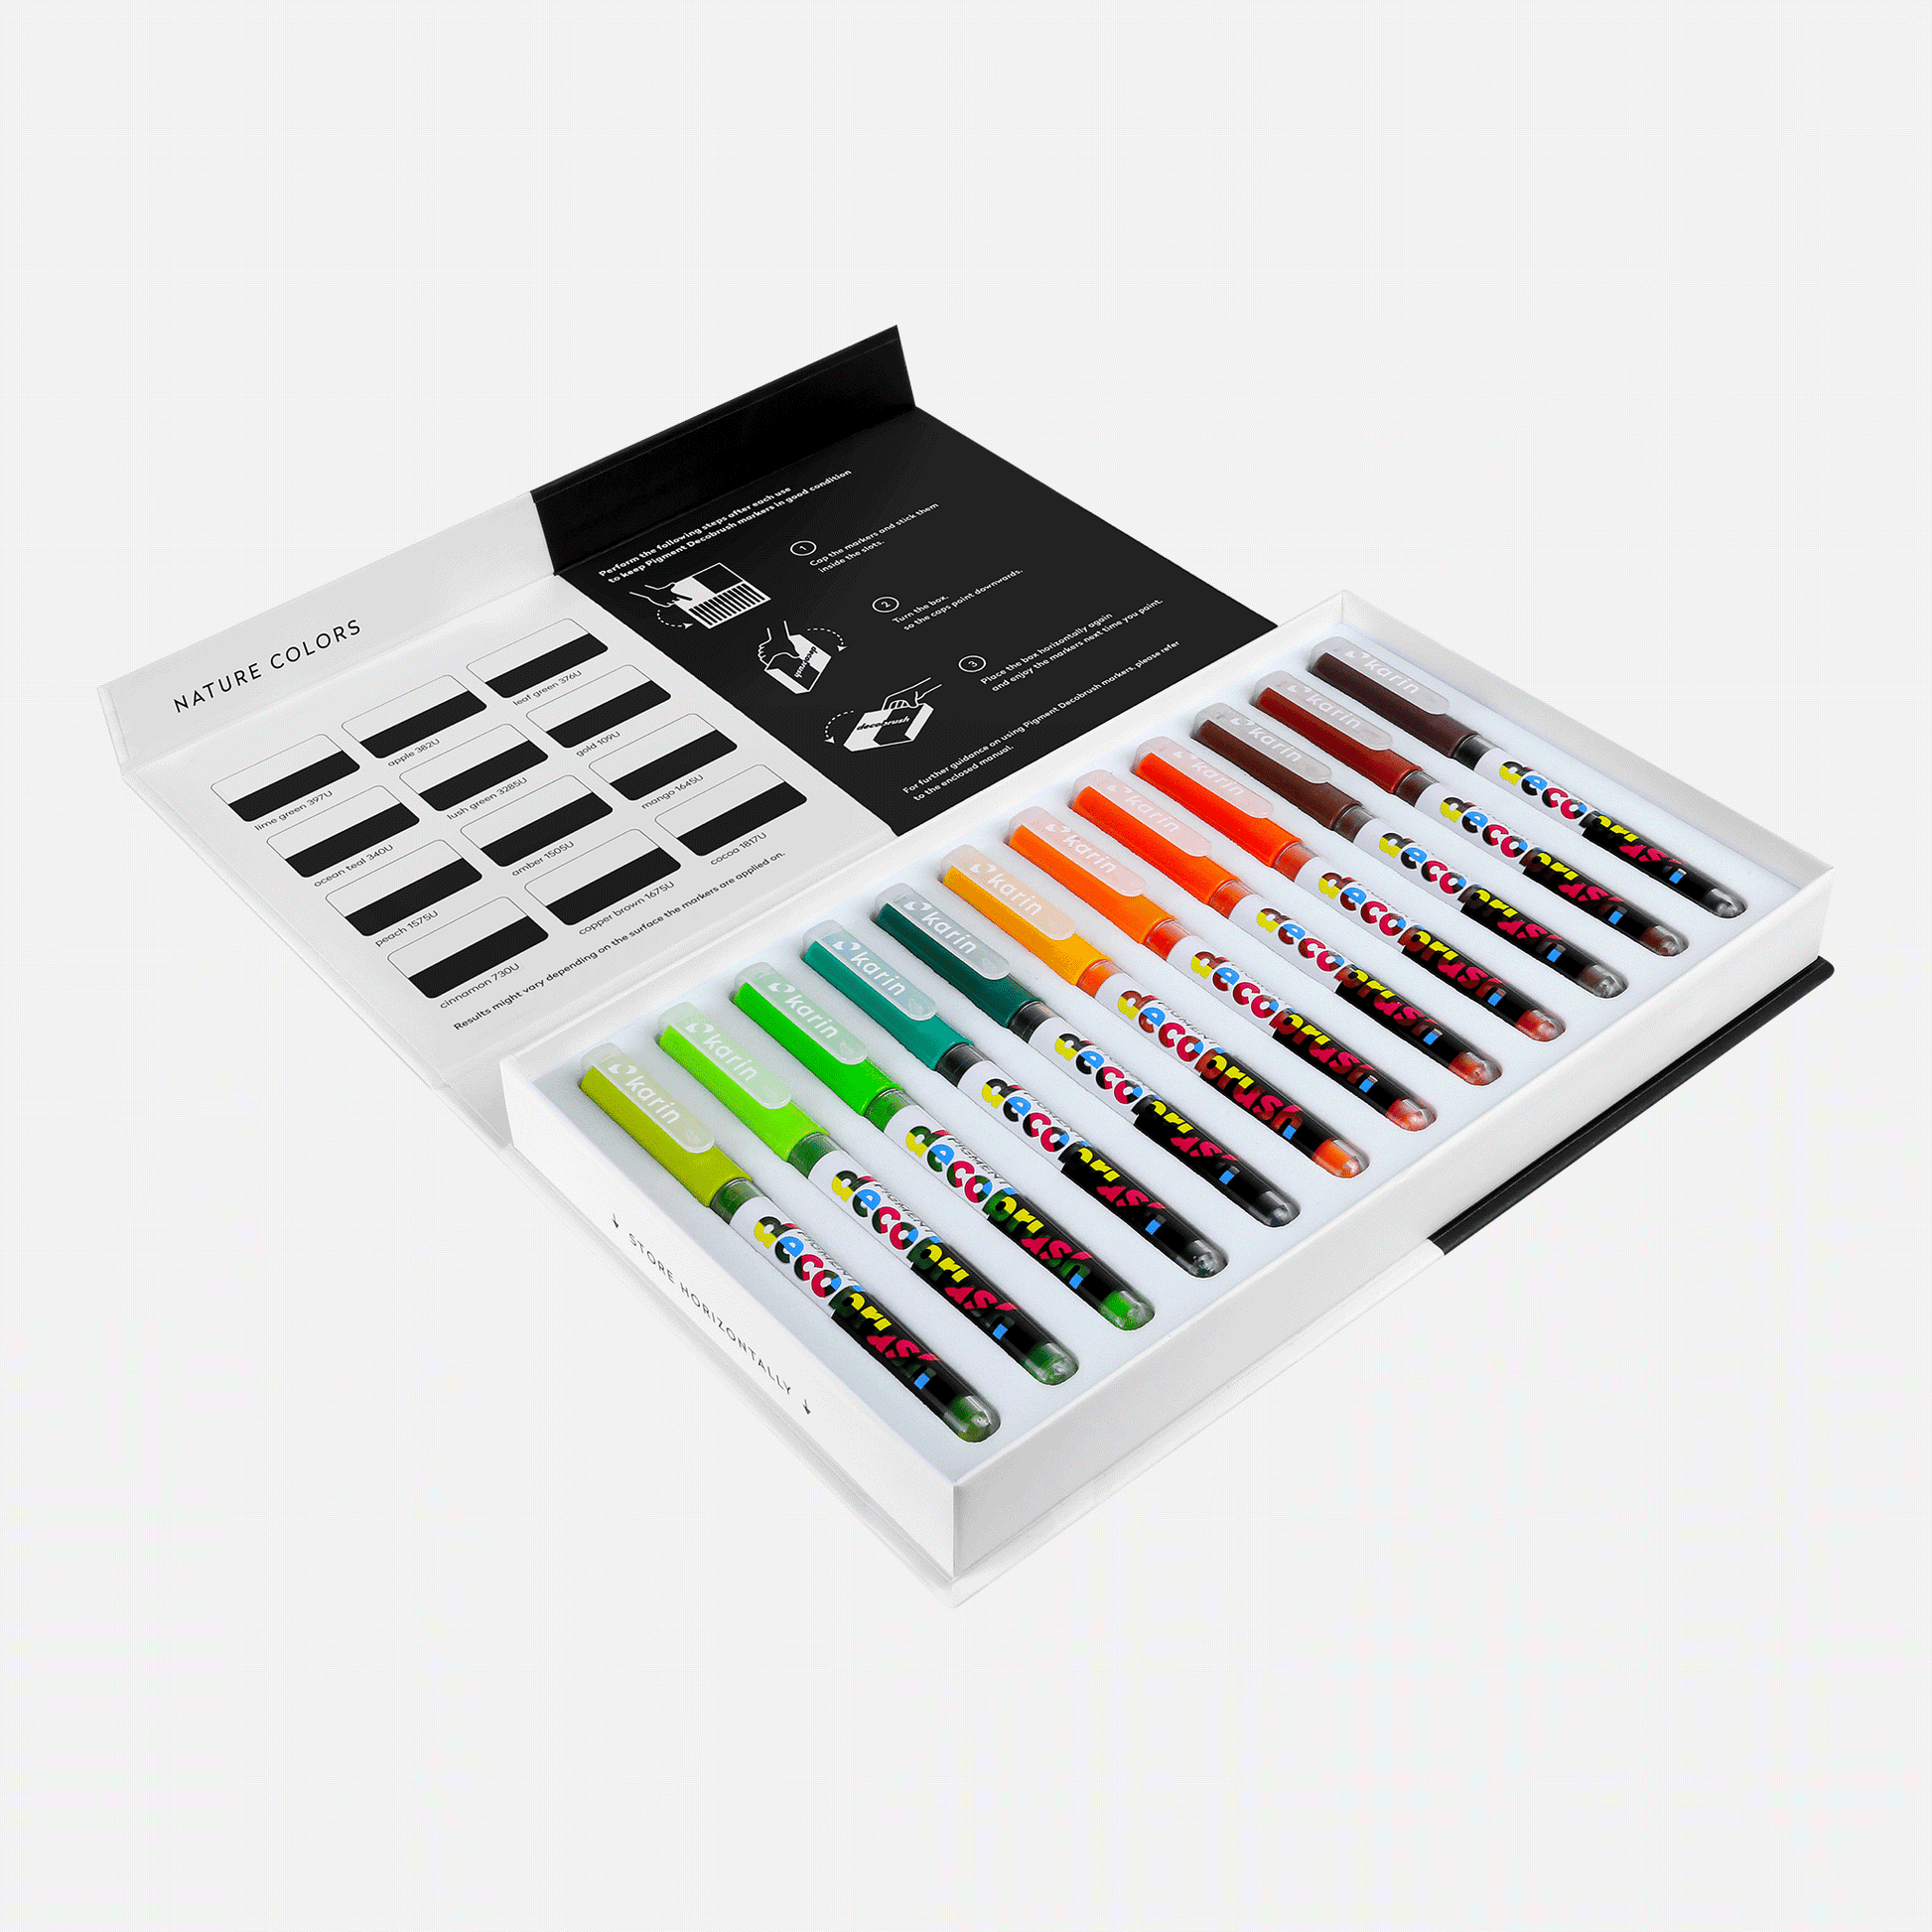 Karin DEcoBrush Markers Floral Individual Colours, Non-toxic Paint, Once  Dry, Is Permanent, Light-resistant and Waterproof - AliExpress